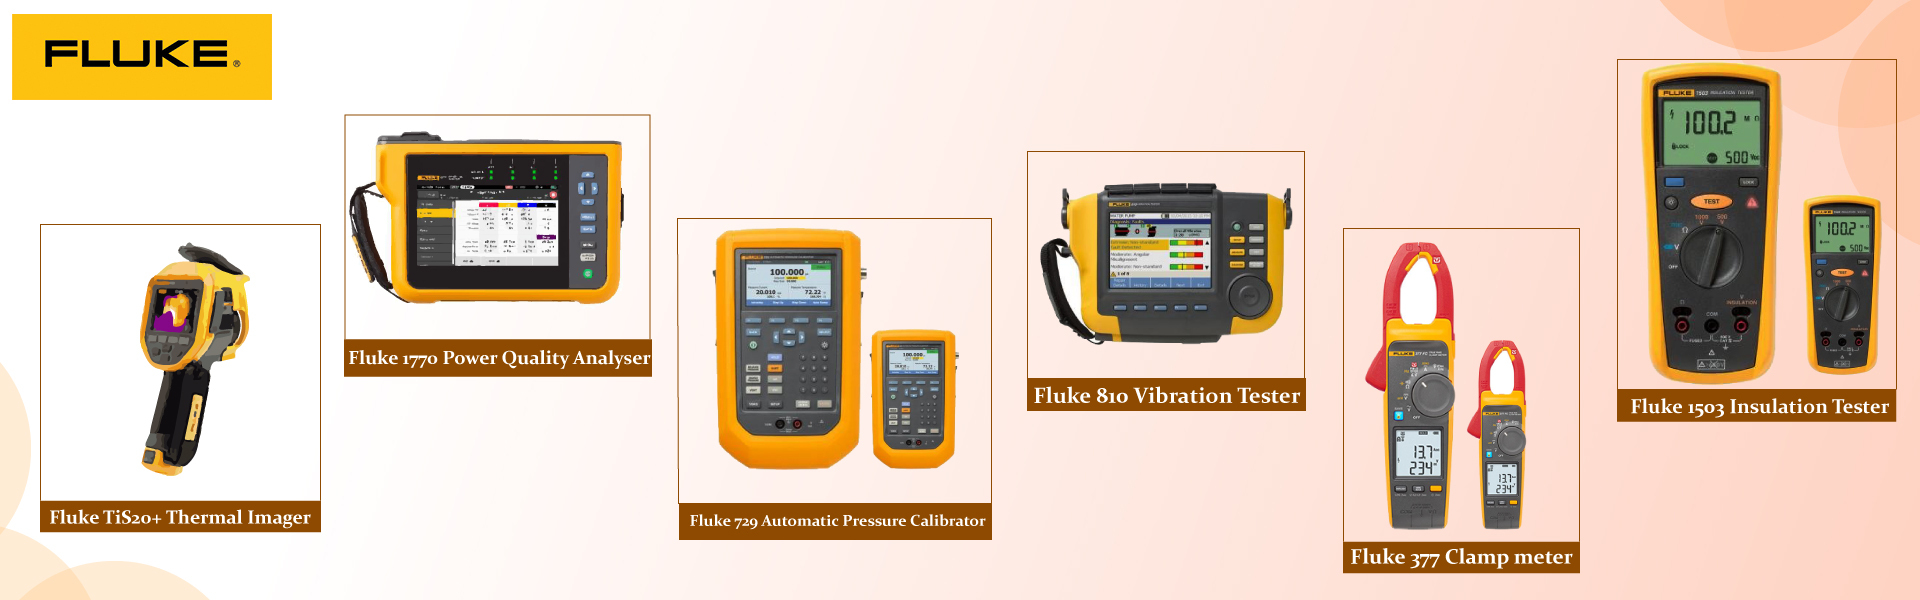 Temperature can be a sign of trouble ahead. With Fluke thermal cameras you can detect issues before they become problems.